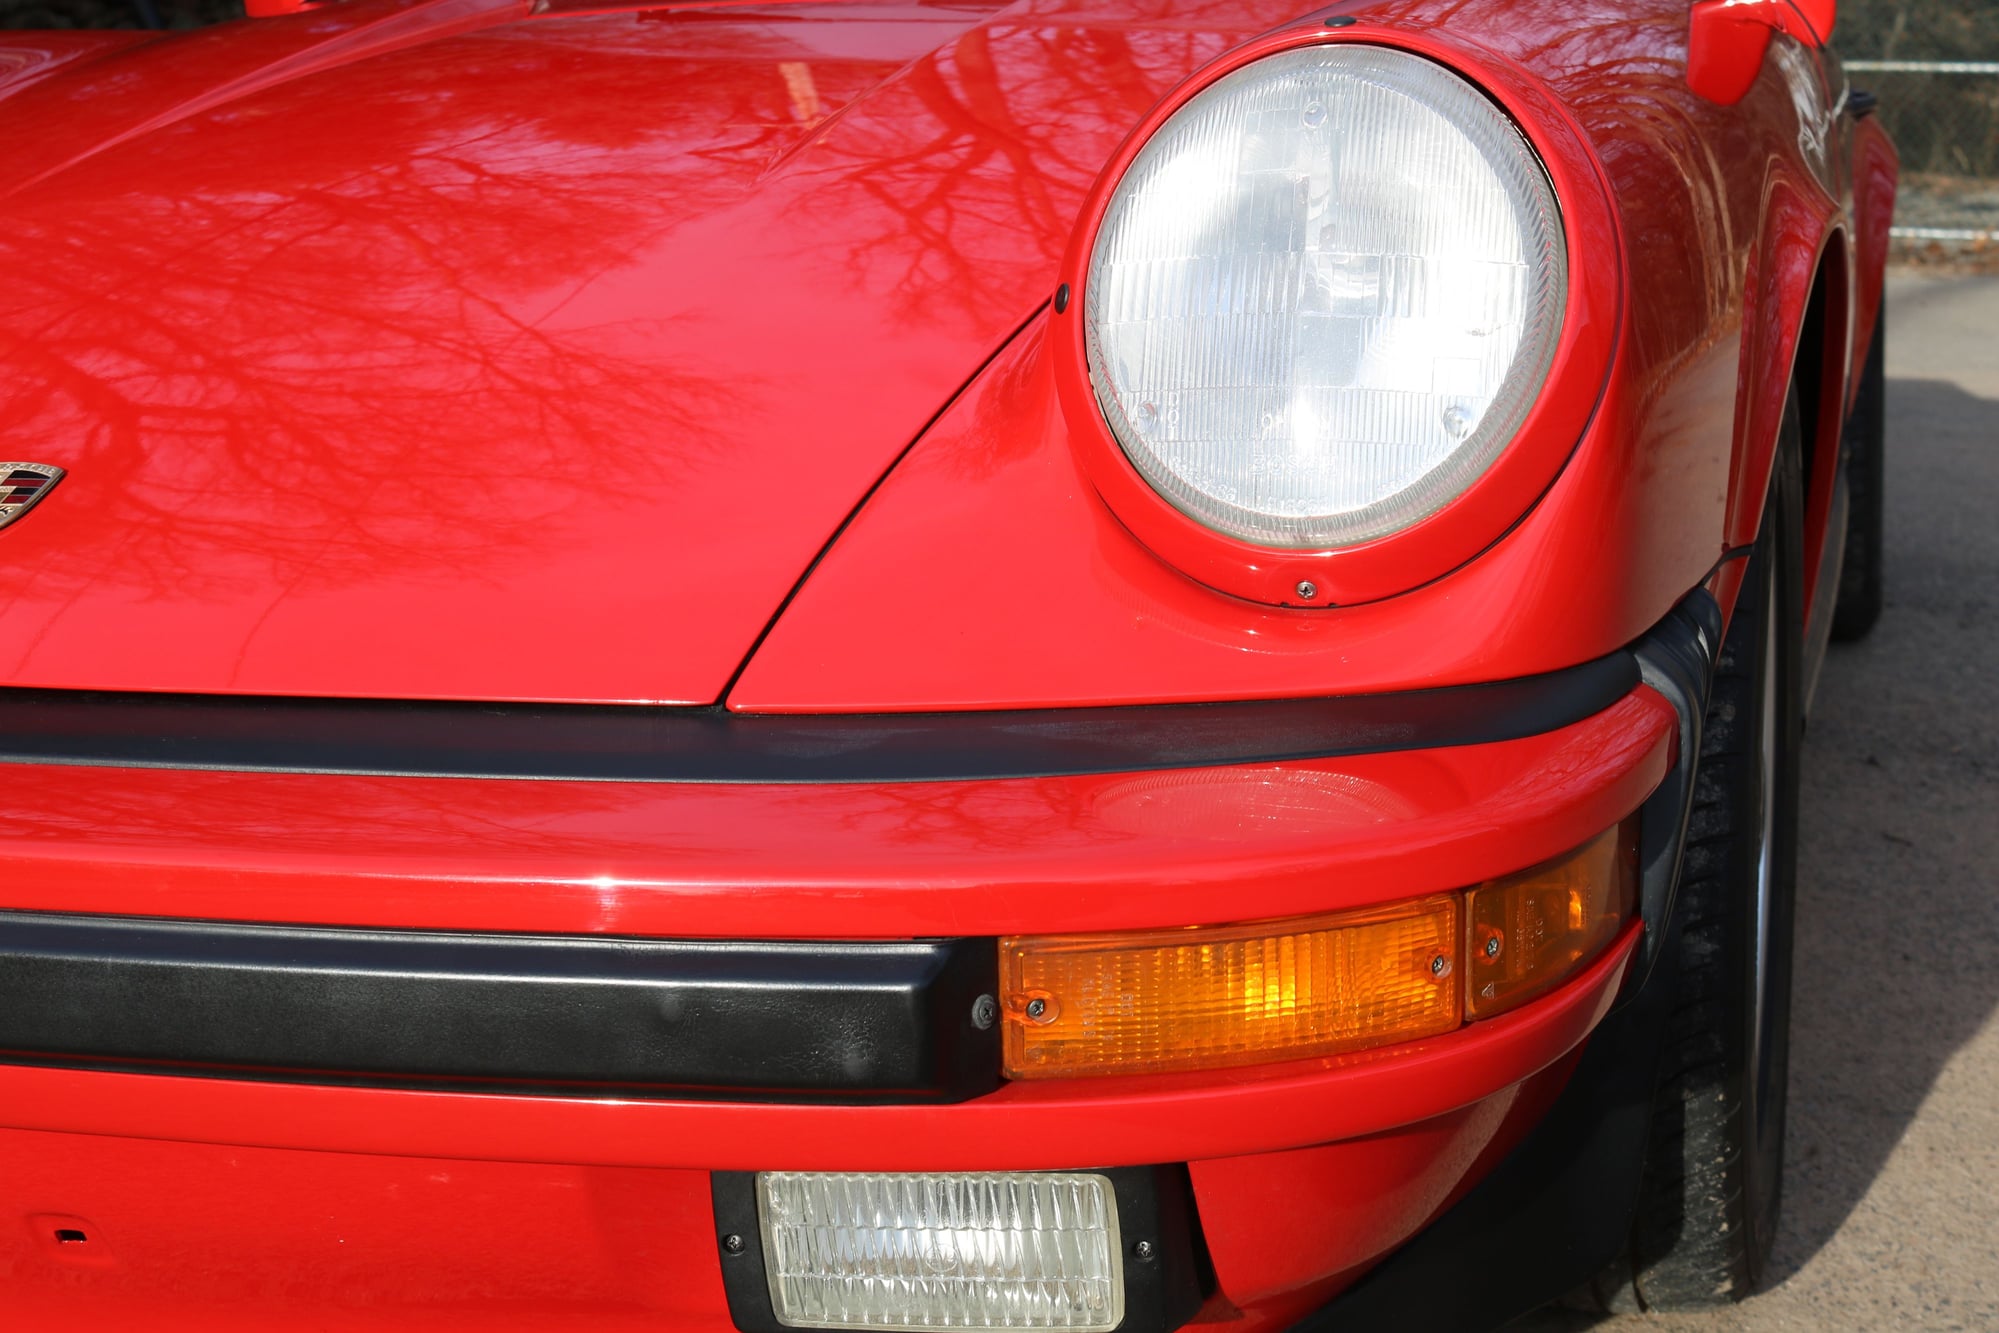 1989 Porsche 911 - 1989 3.2L Carrera G50 Manual Guards Red over Oyster Beige - Used - VIN WP0AB0919KS120736 - 159,000 Miles - 6 cyl - 2WD - Manual - Coupe - Red - Mountainside, NJ 07092, United States